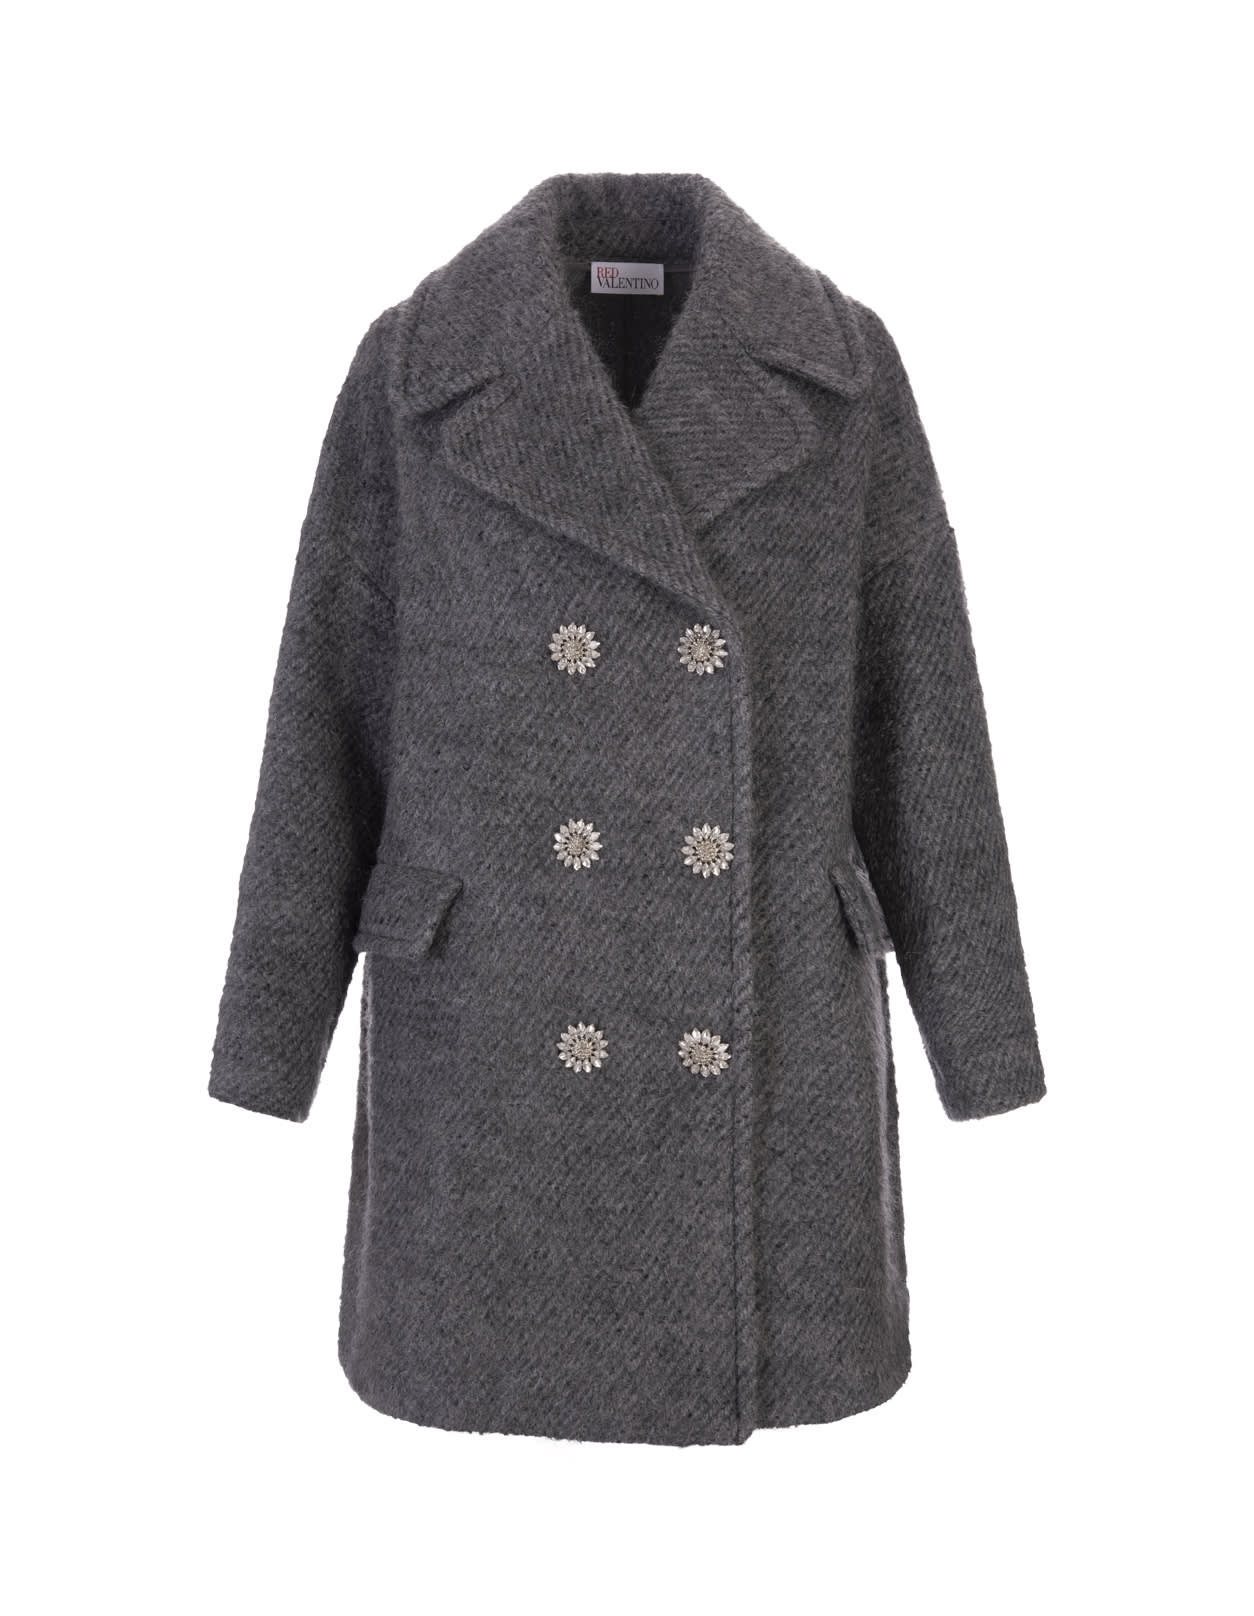 RED Valentino Woman Gray Boucle Wool Coat With Jewel Buttons